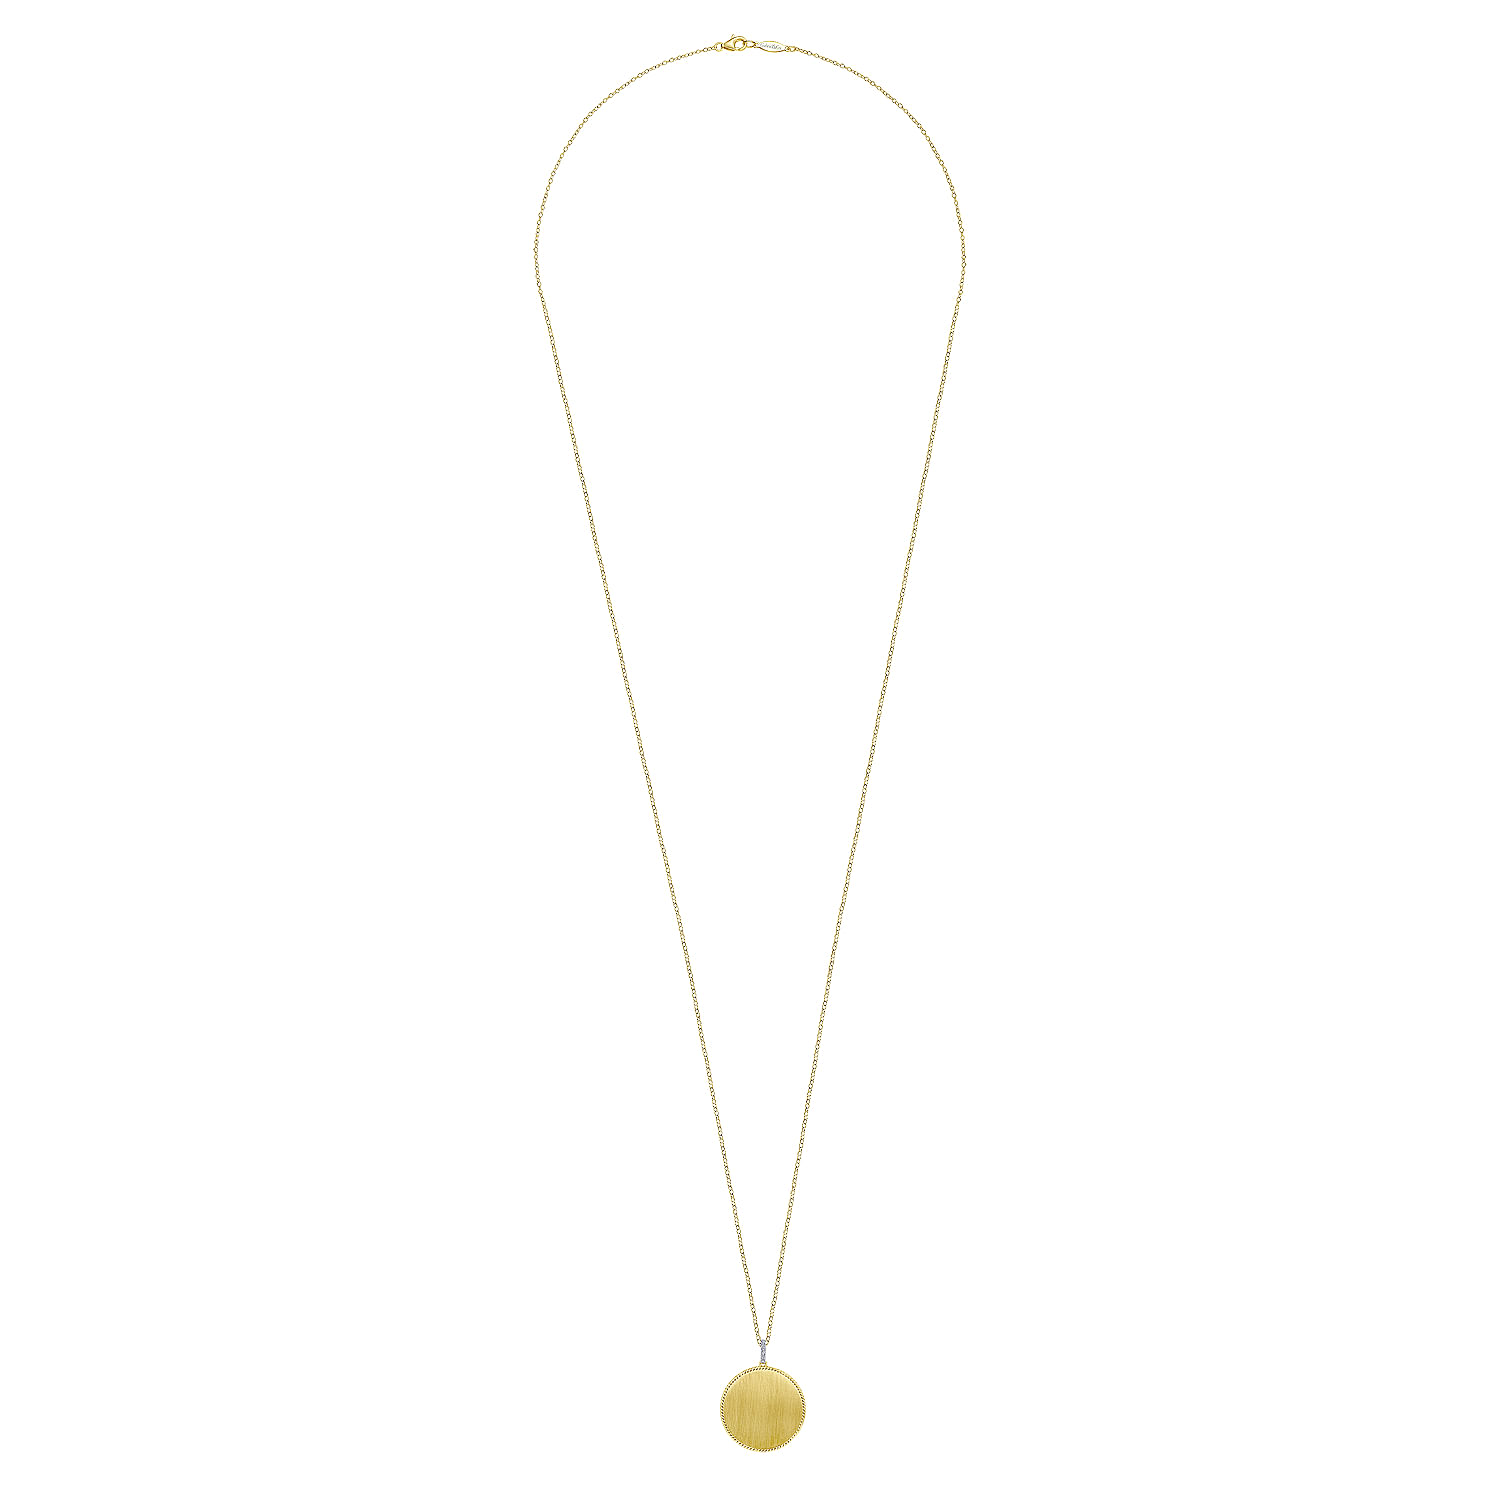 32 inch 14K Yellow Gold Round Pendant Necklace with Diamond Bale